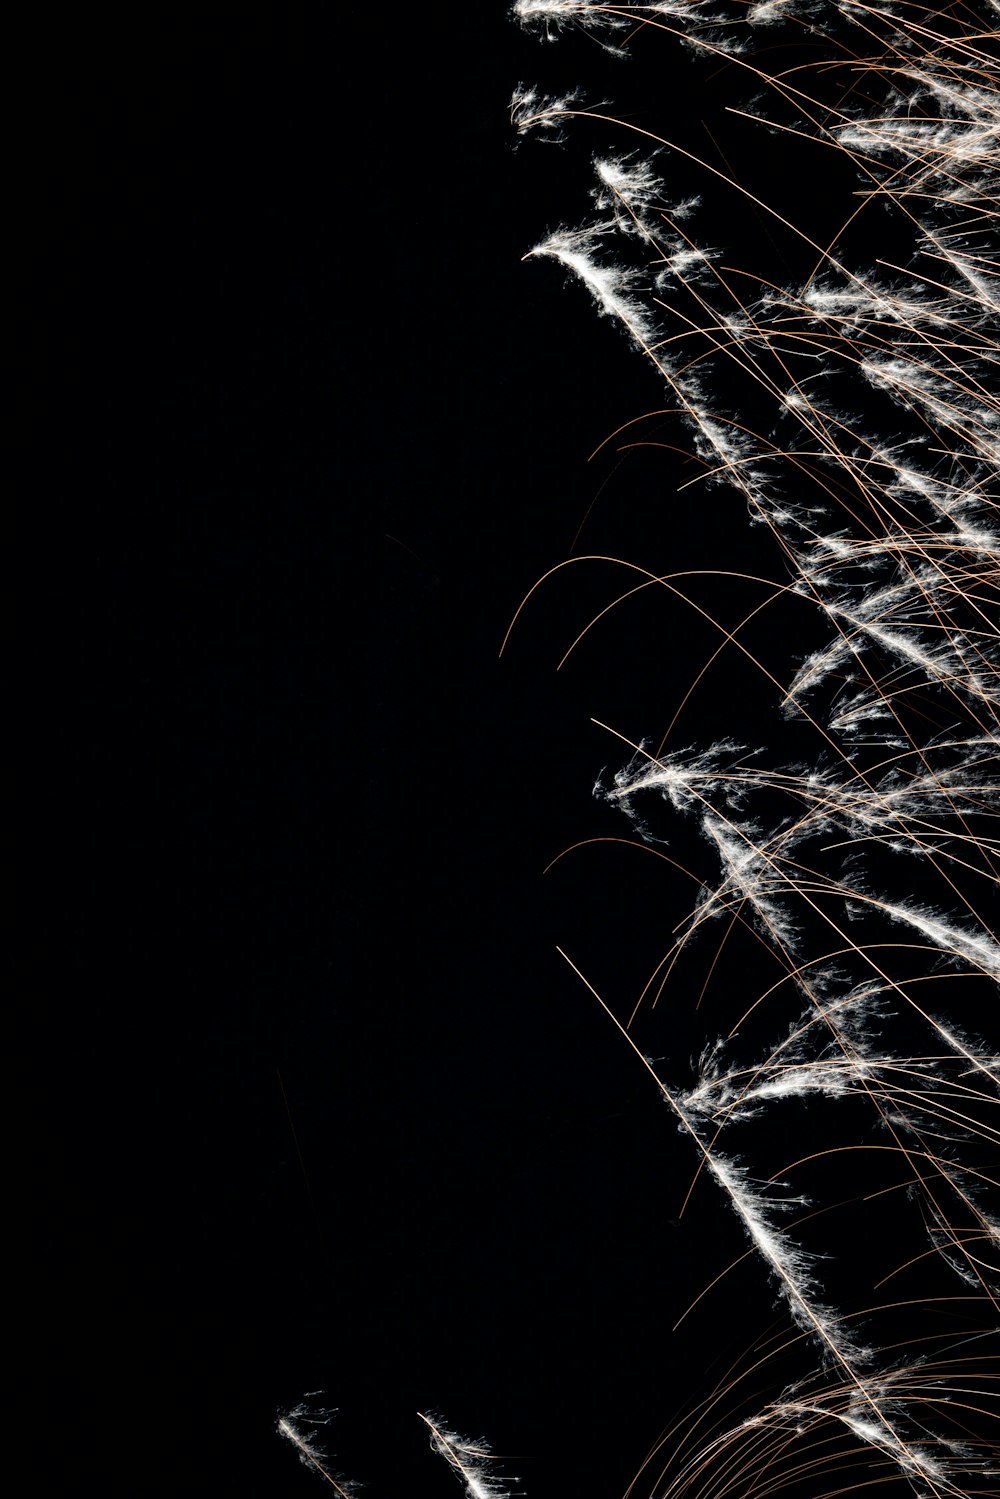 a long exposure of fireworks in the dark sky